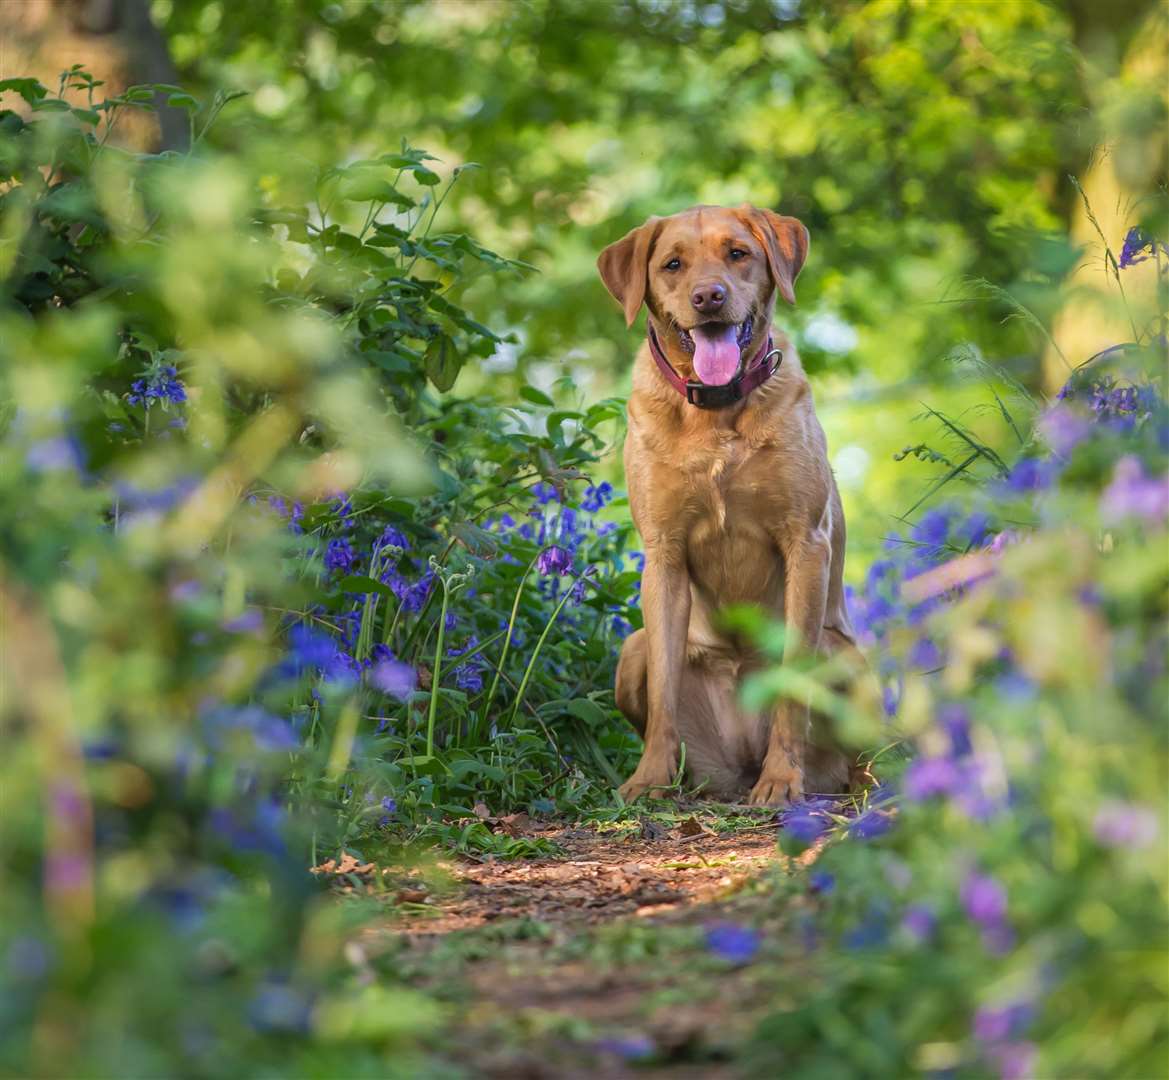 Your pooch should avoid getting close to flowers such as daffodils or tulips